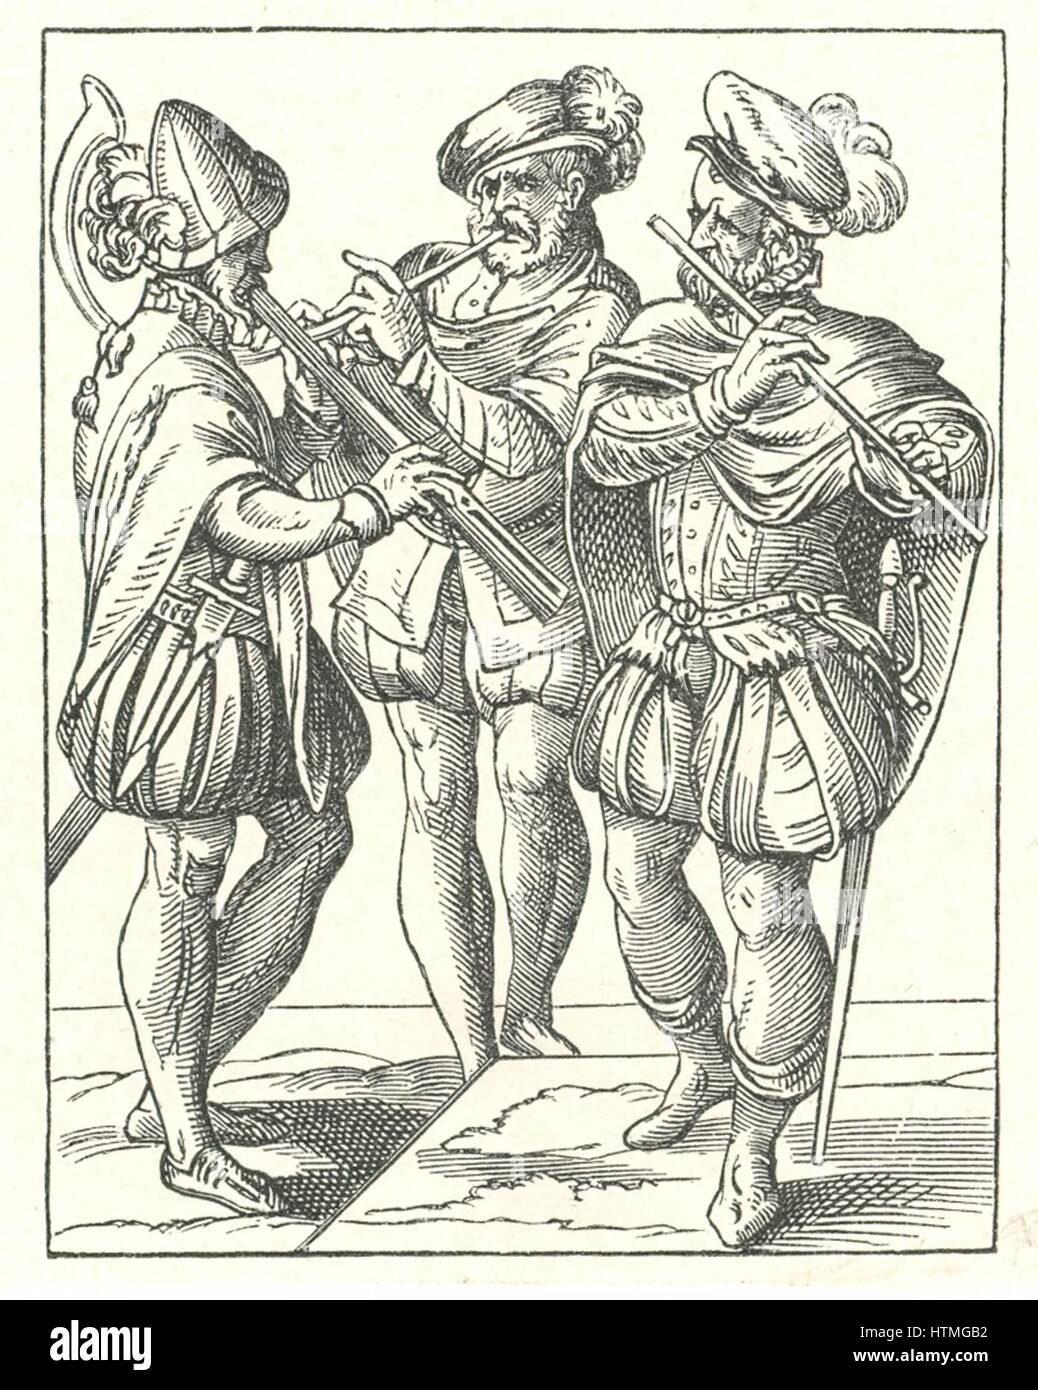 German musicians playing various wind instruments such as flute and horn. Woodcut by Jost Amman (1535-1591). Stock Photo